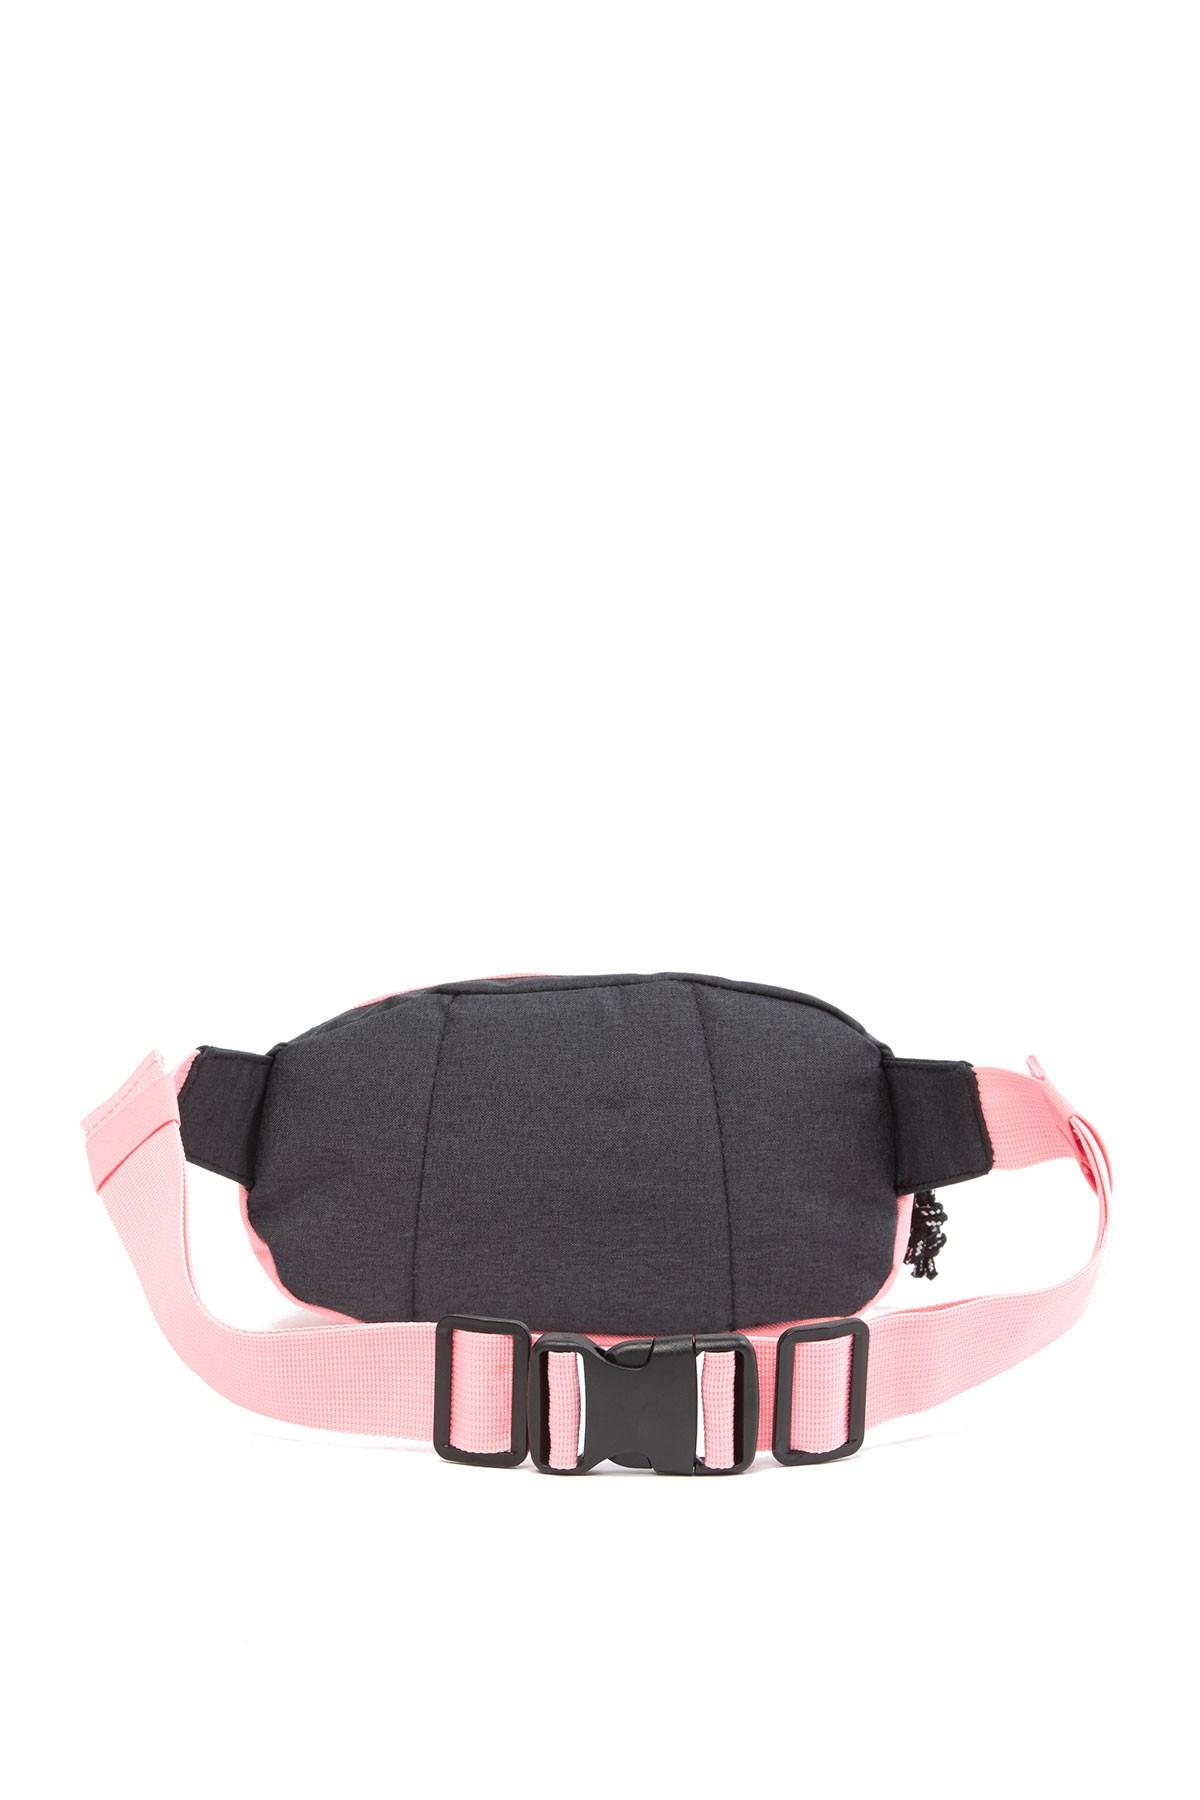 forever champ signal fanny pack